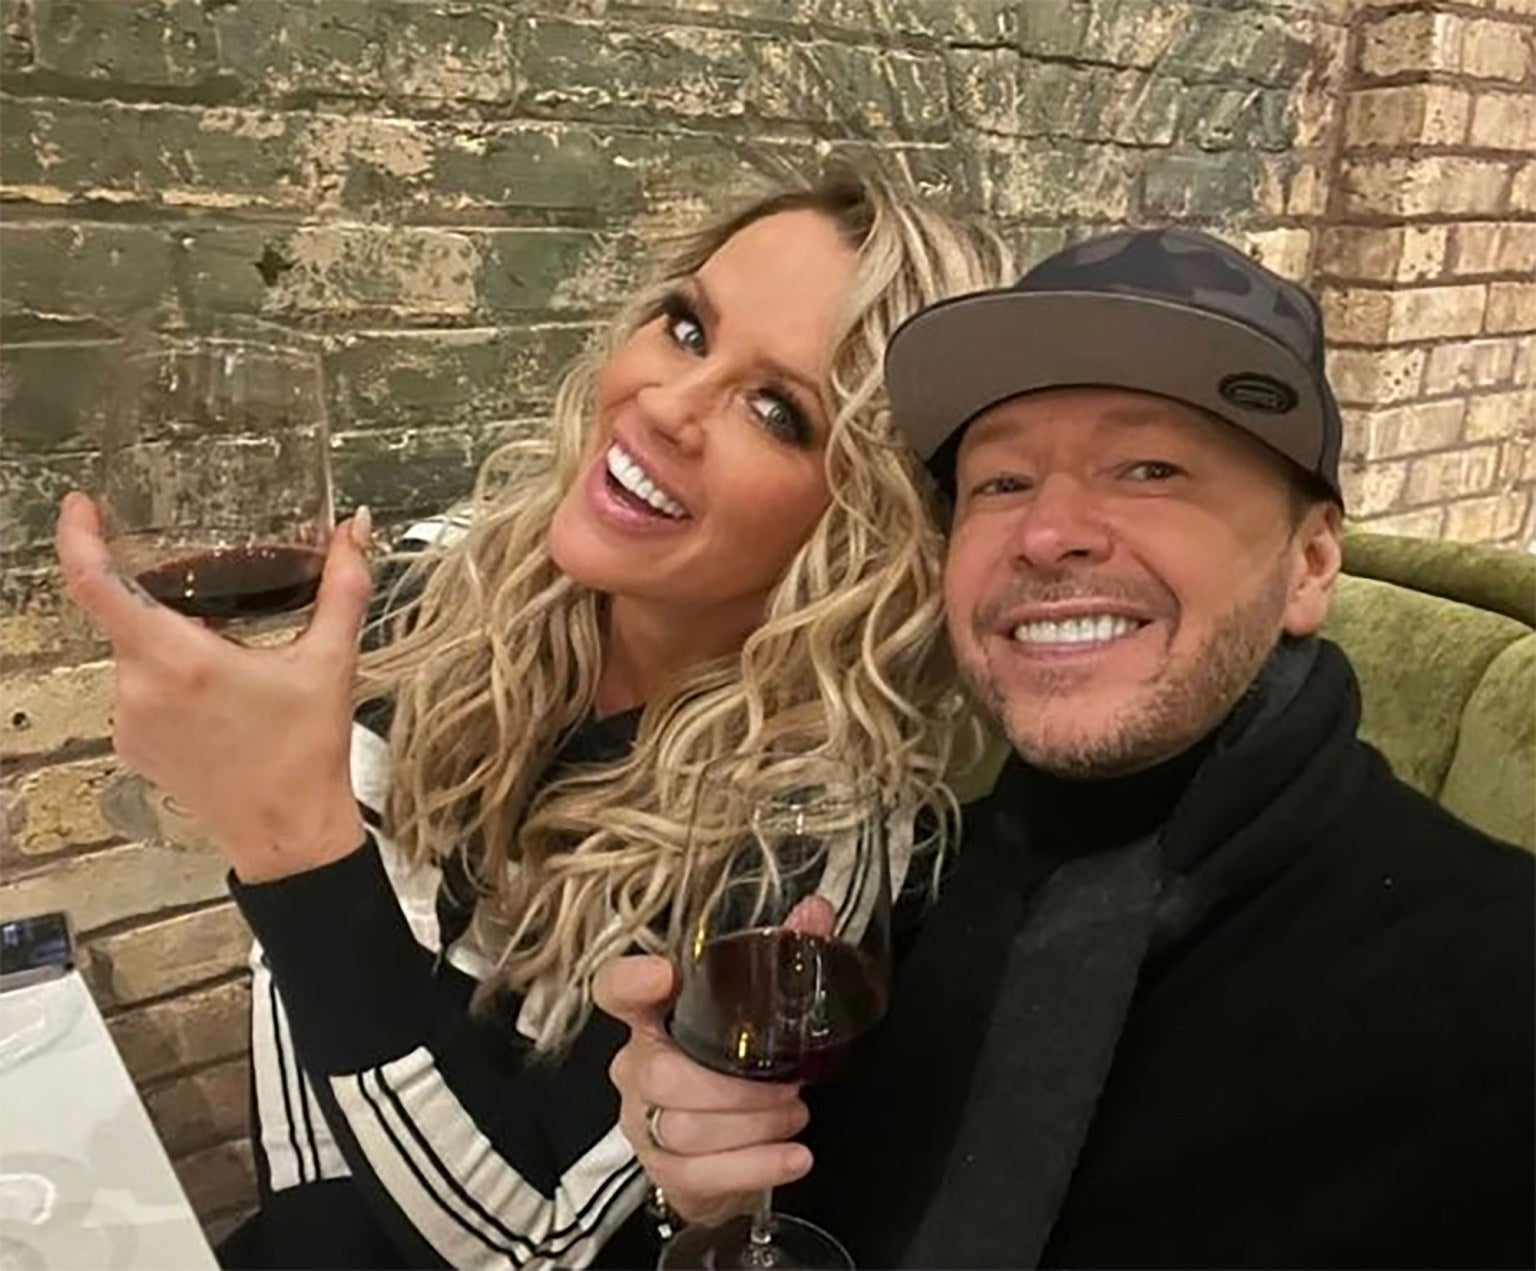 Jenny McCarthy and Donnie Wahlberg pop into Scott Harris Hospitality's newest concept and St. Charles hotspot, Mio Modo, after the annual holiday parade.